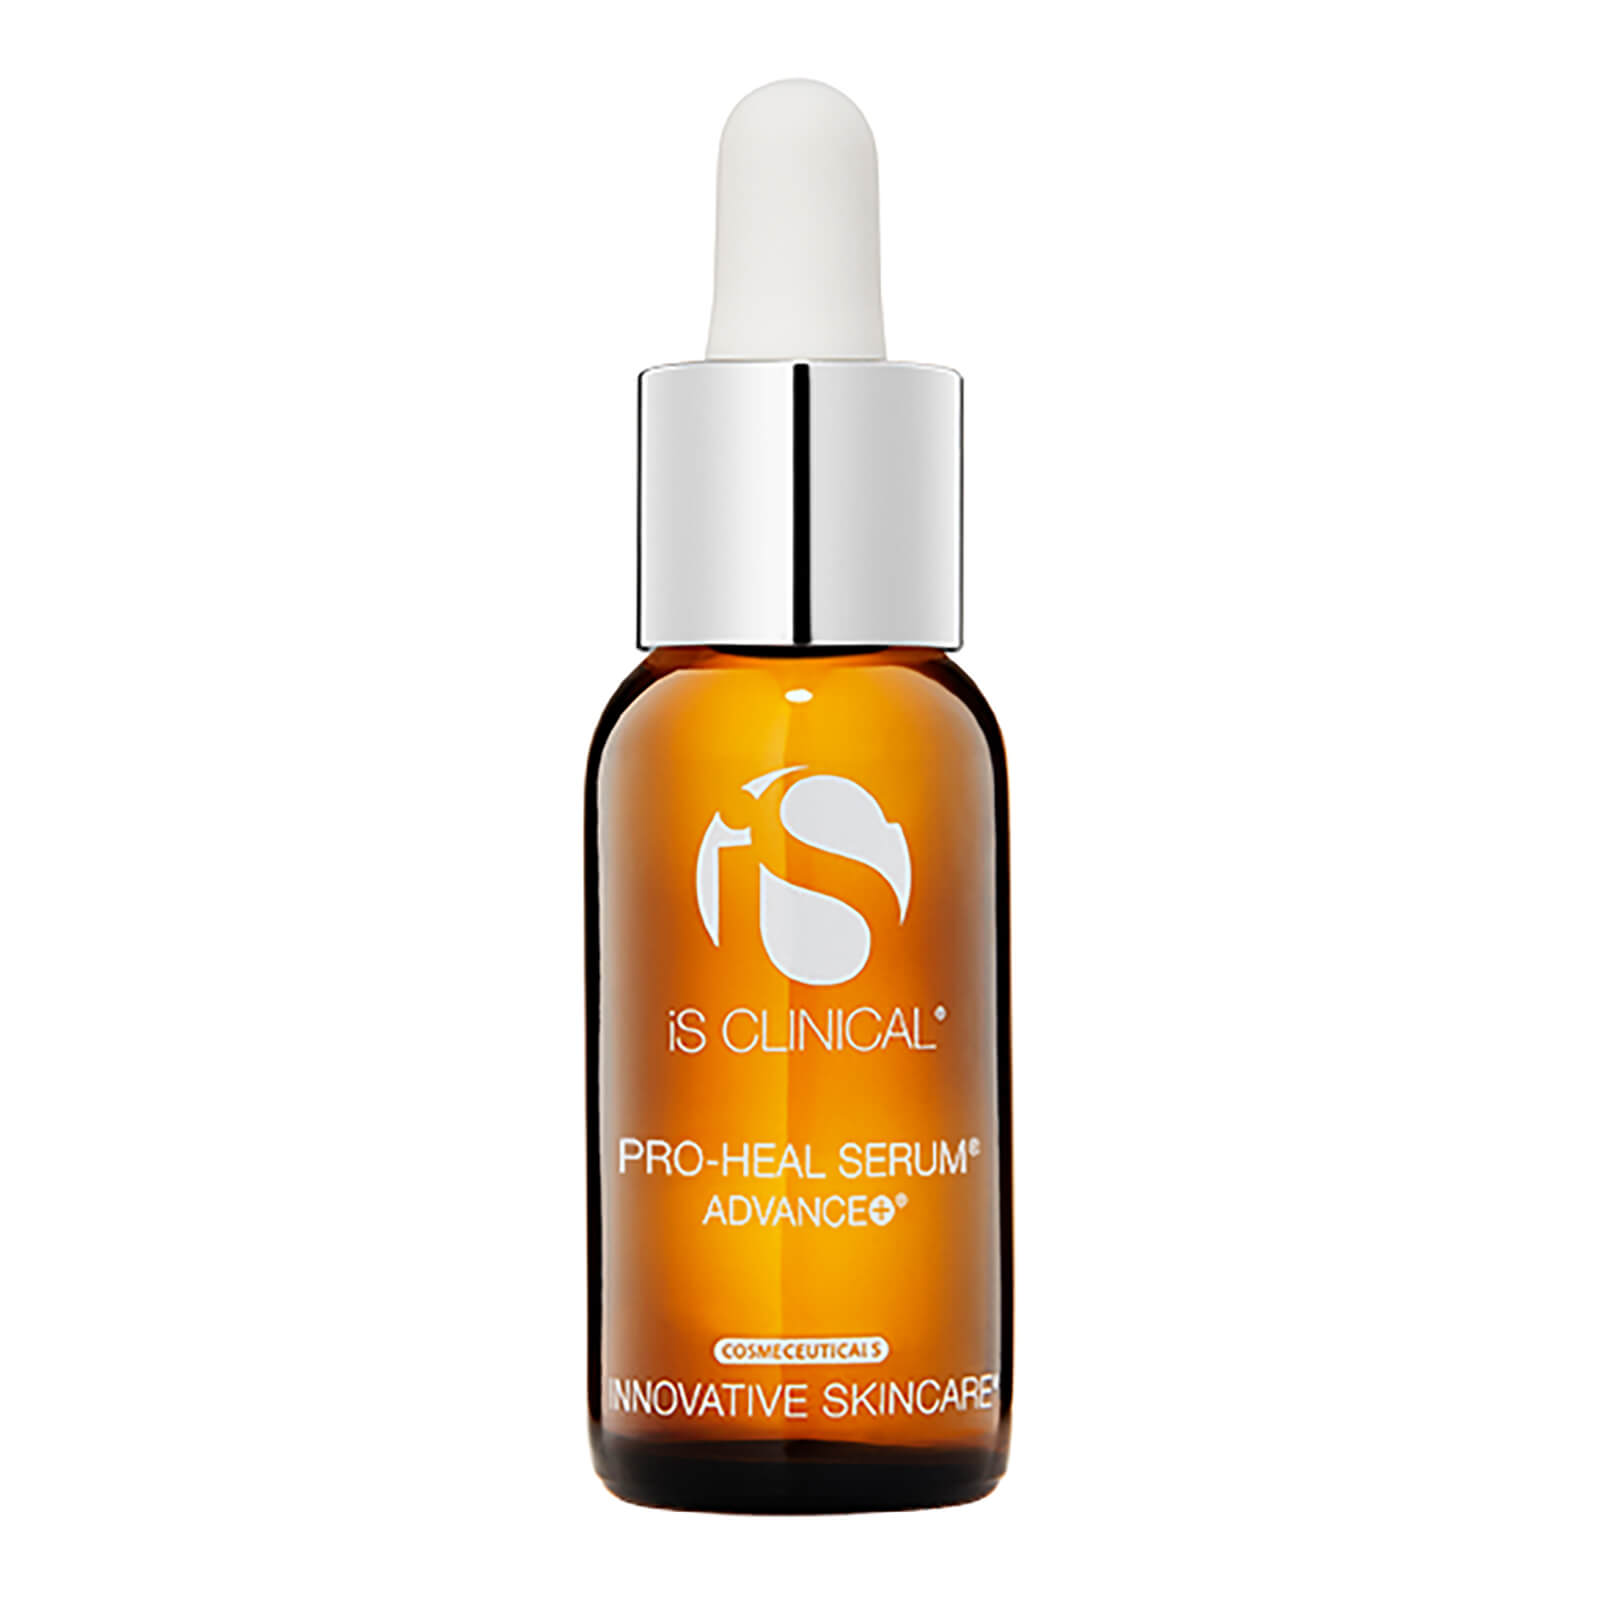 iS Clinical Pro-Heal Serum Advance Plus | SkinStore